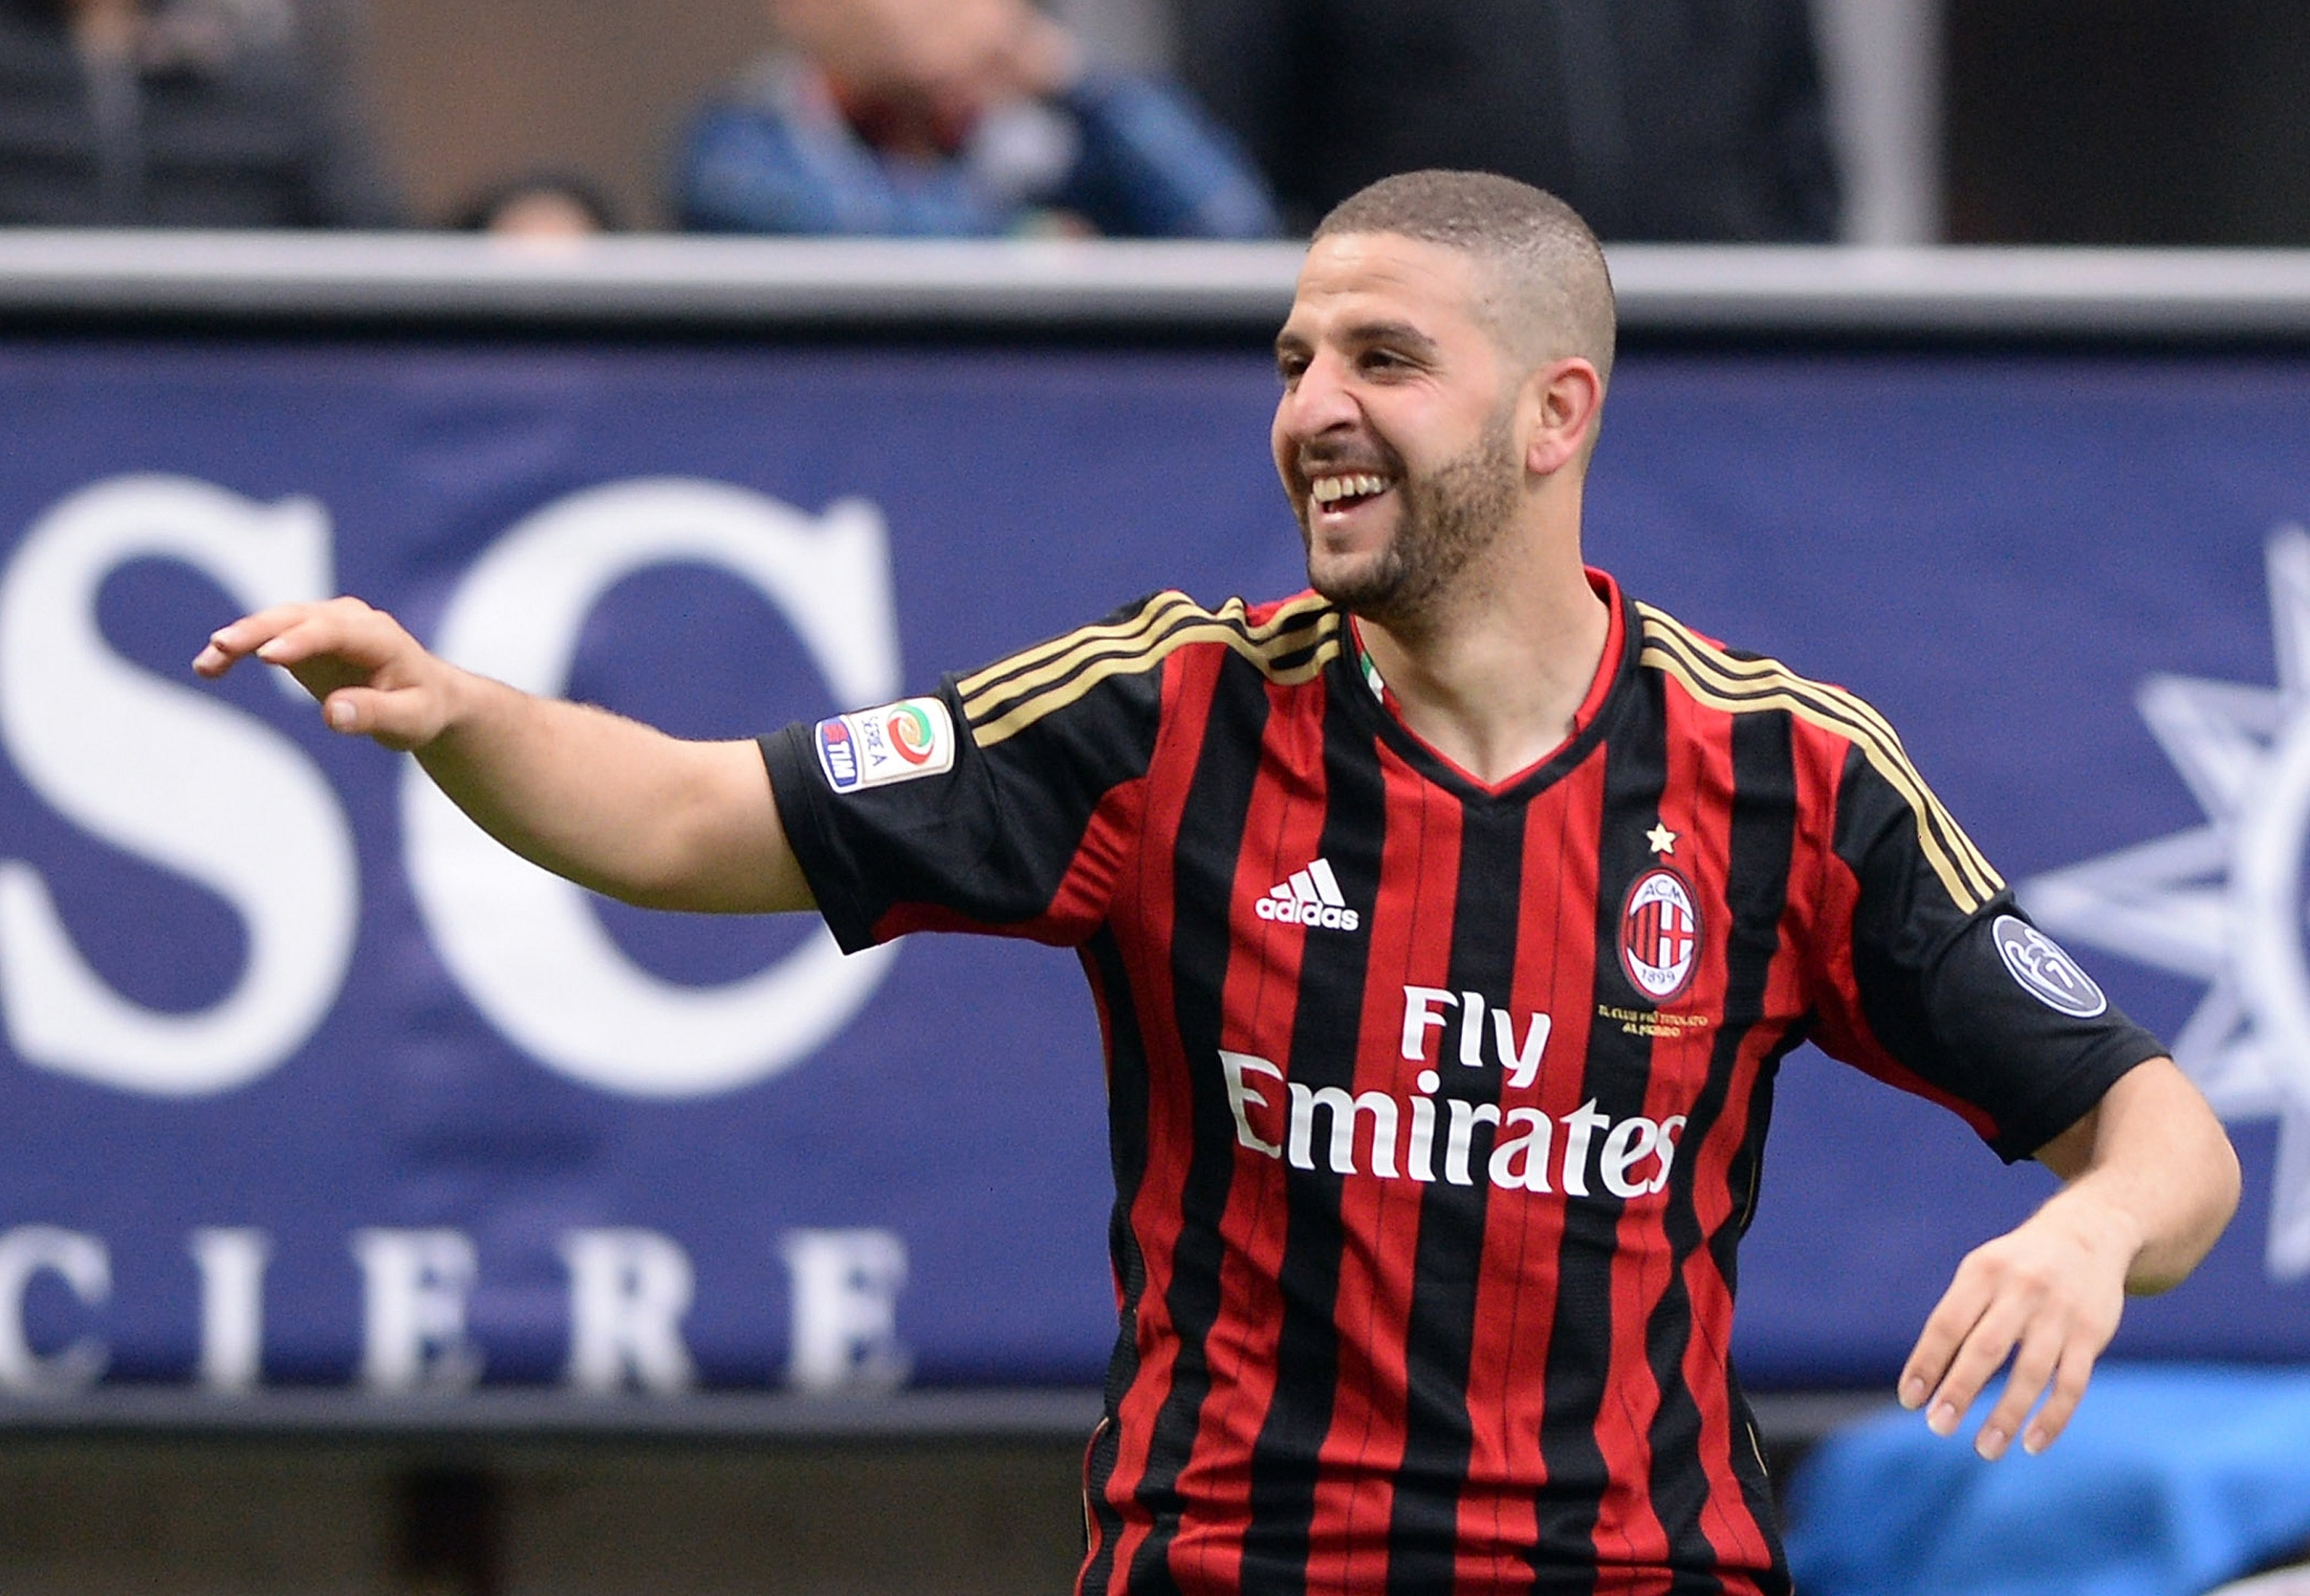 MILAN, ITALY - APRIL 19:  Adel Taarabt of AC Milan (R) celebrates scoring the second goal during the Serie A match between AC Milan and AS Livorno Calcio at San Siro Stadium on April 19, 2014 in Milan, Italy.  (Photo by Claudio Villa/Getty Images)